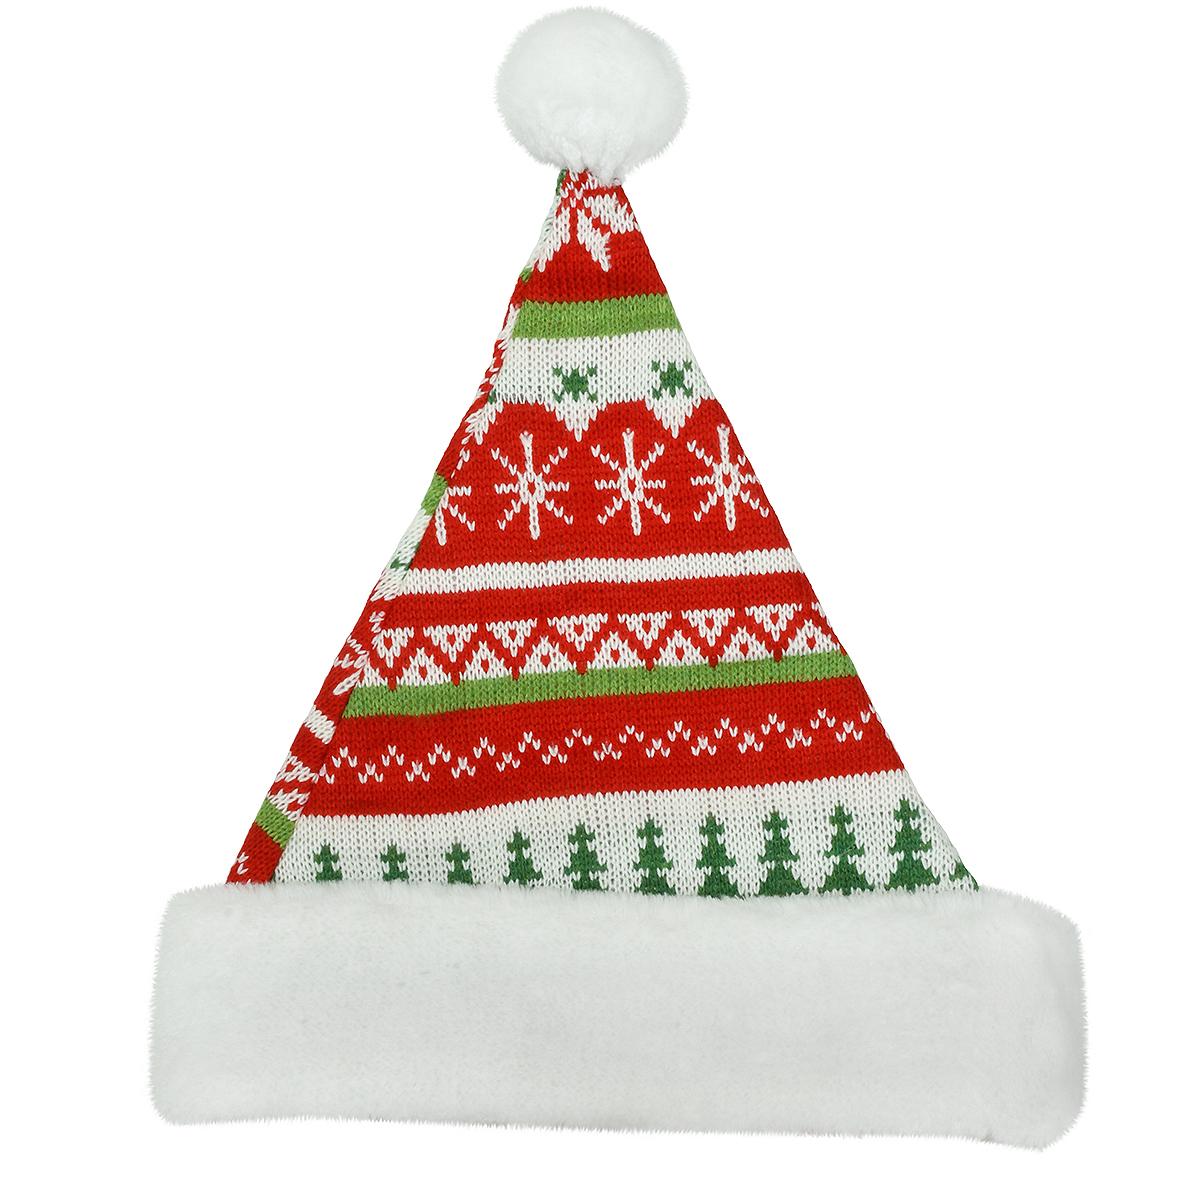 15 Inch Knitted Santa Hat